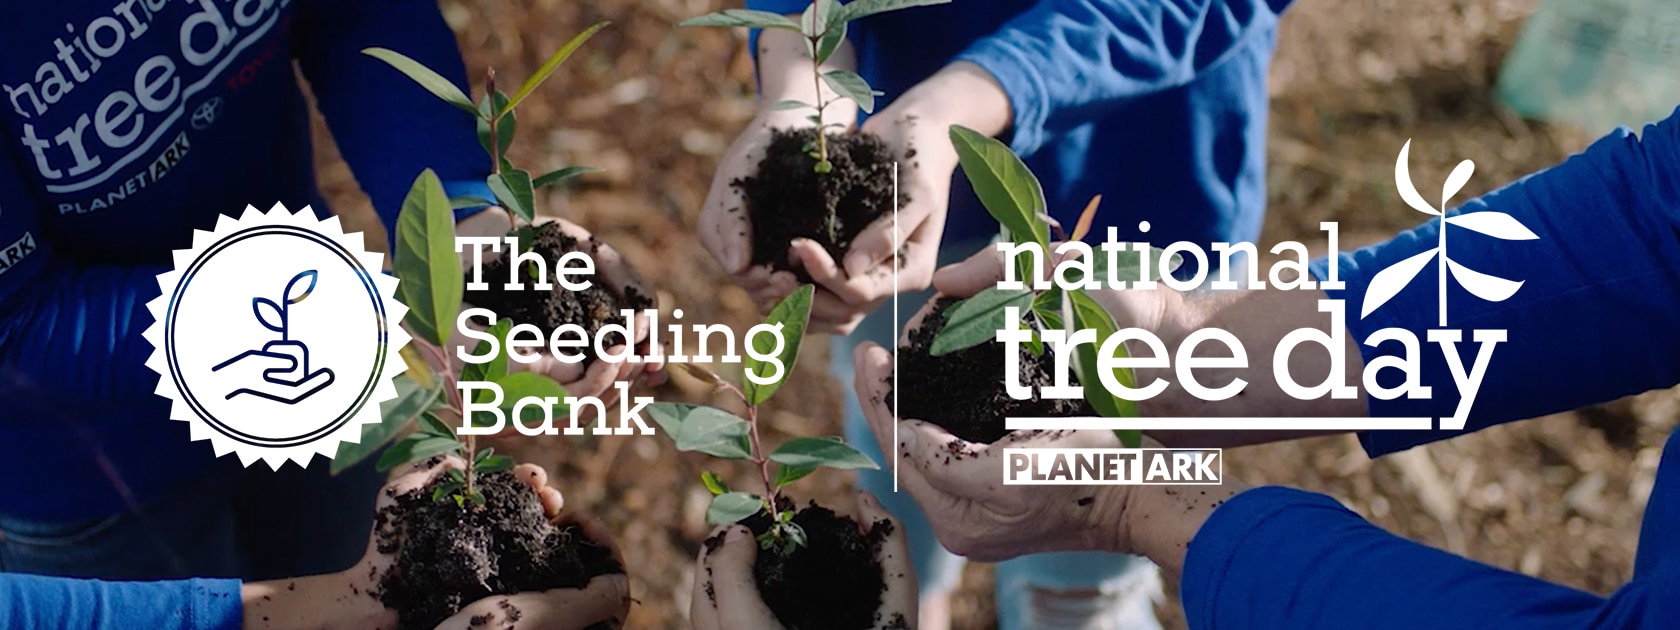 five hands holding tree saplings with The Seedling Bank and National Tree Day logos over the image